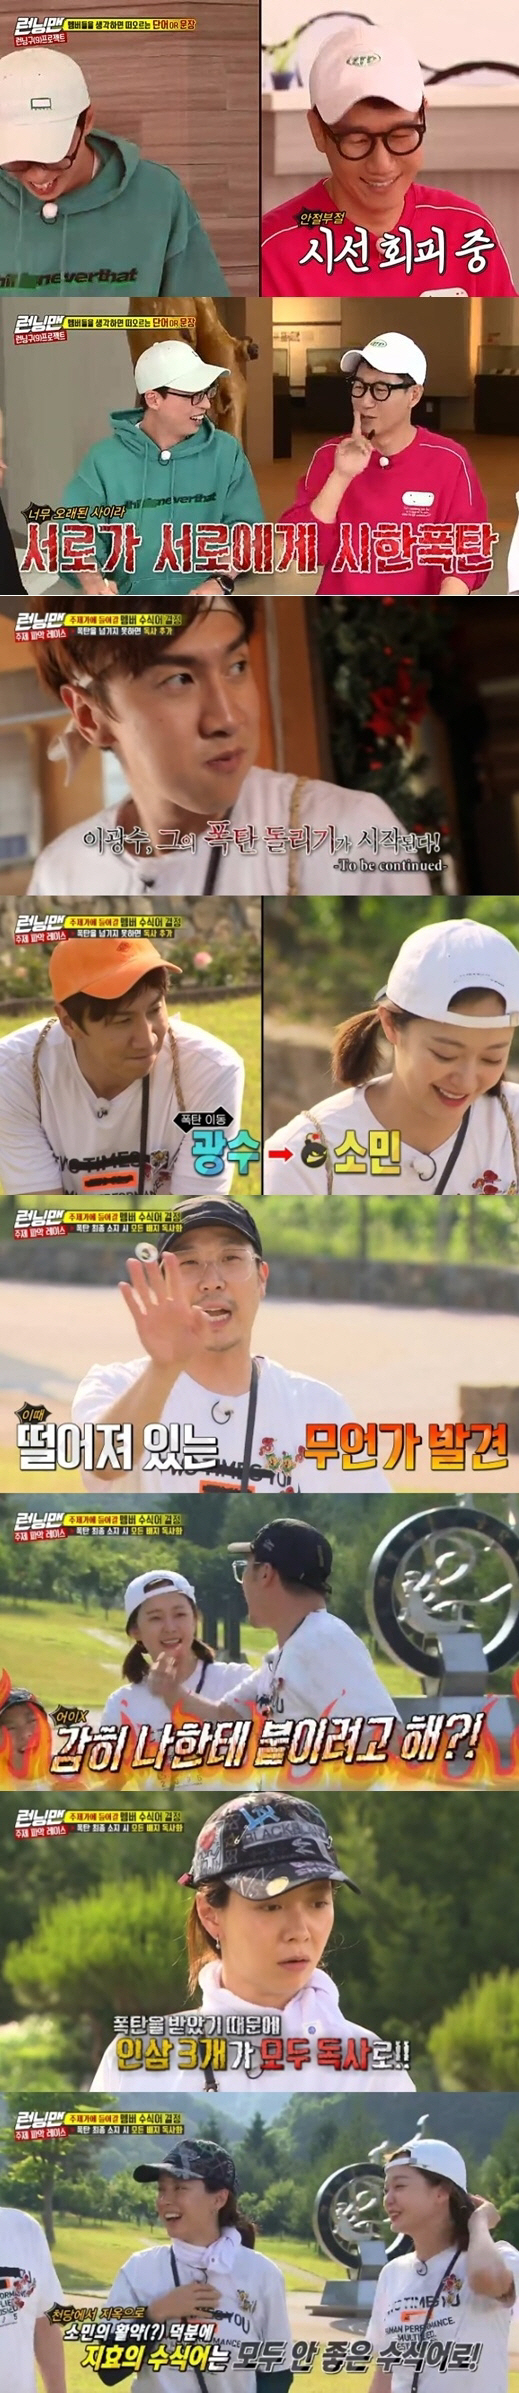 SBS Running Man has maintained its position as the number one spot in the same time zone of 2049 target audience rating.According to Nielsen Korea, the ratings agency, Running Man, which was broadcast on the 16th, soared to 8.4% of the highest audience rating per minute, and the 2049 target audience rating, which is an important indicator of major advertising officials, recorded 3.8% (based on the second part of the Seoul Capital Areas audience rating), topping the Masked Wang and The presidents ear is the donkey ear did.The average audience rating was 5.2% in the first part and 6.8% in the second part (based on the audience rating of households in the Seoul Capital Area).The broadcast was decorated with a theme grasp race for the theme song to be presented at Fan Meeting this summer.The members had to set the number of good modifiers ( Ginseng badges) and bad modifiers (poison badges) of the theme song while they decided to participate in the songwriting of the theme song themselves, and had to move to the bomb within an hour of the bomb because there was a bomb.Because there is a time limit for bombs, if you pass that time, you will get a viper badge. Even if you take it, you will get another viper badge.Among them, Jeon So-min shook the plate of the race by showing off the single-like aspect that led to the reversal, and noticed that he had a bomb late on the last mission.The scene soared to 8.4% of the audience rating per minute, taking the best one minute.So, Jeon So-min showed boldness to hand over his bomb to Song Ji-hyo, and Song Ji-hyo, who ran Race 1st pRace, had to watch his ginseng badge turn into a poison badge at the last minute.Yoo Jae-Suk took the first pRace in the race with fisherman, and Yoo Jae-Suk chose a modifier to enter the theme song based on the badge of each member.The Running Man Theme Song, which participated in the lyrics of the members, will be unveiled at the Running Man Fan Meeting to be held this summer.